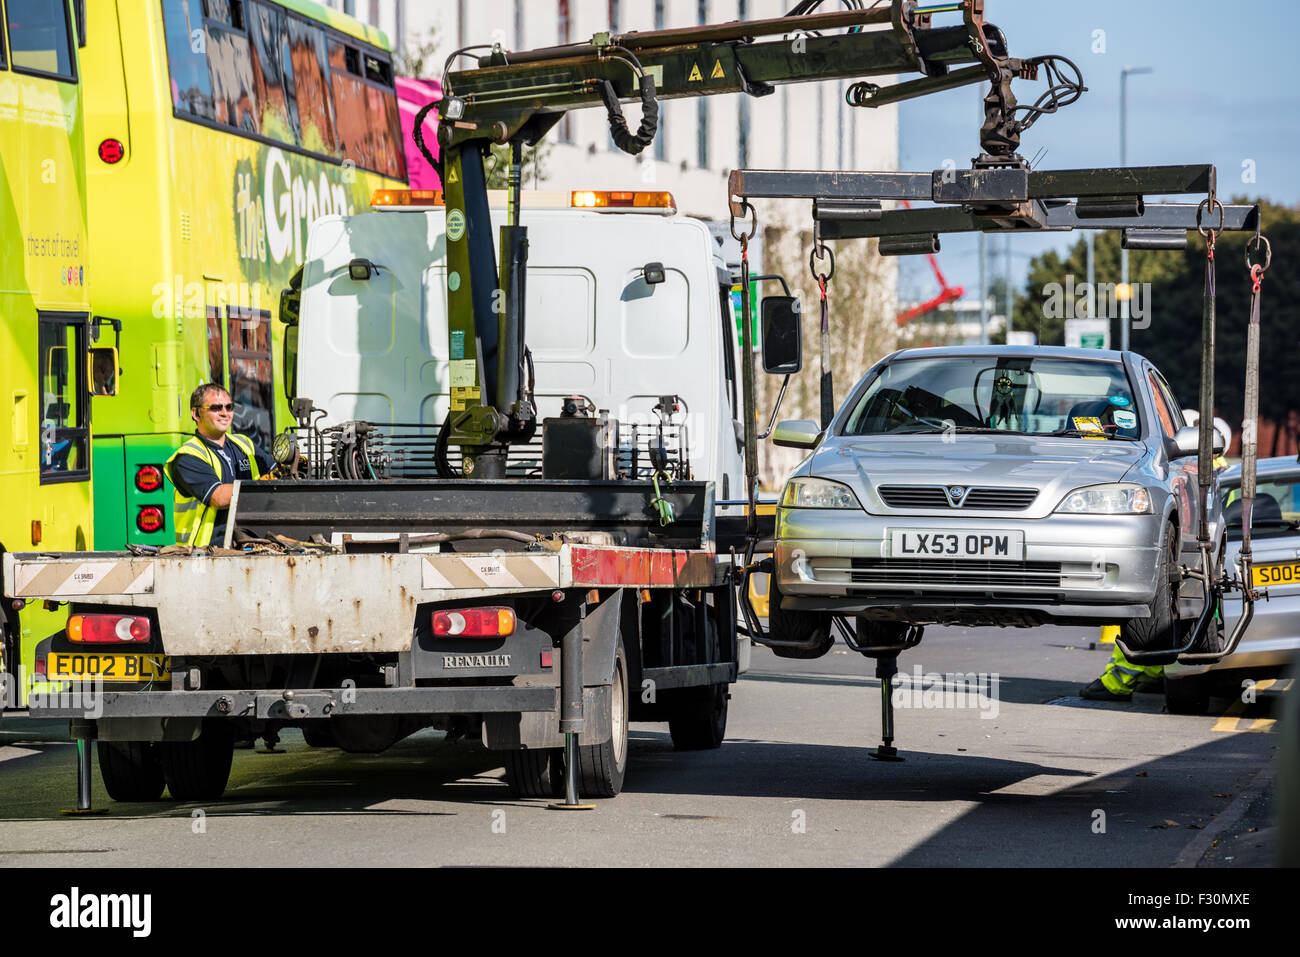 A Car being lifted and taken away on the back of a pickup truck  for illegal parking in Birmingham West Midlands UK Stock Photo